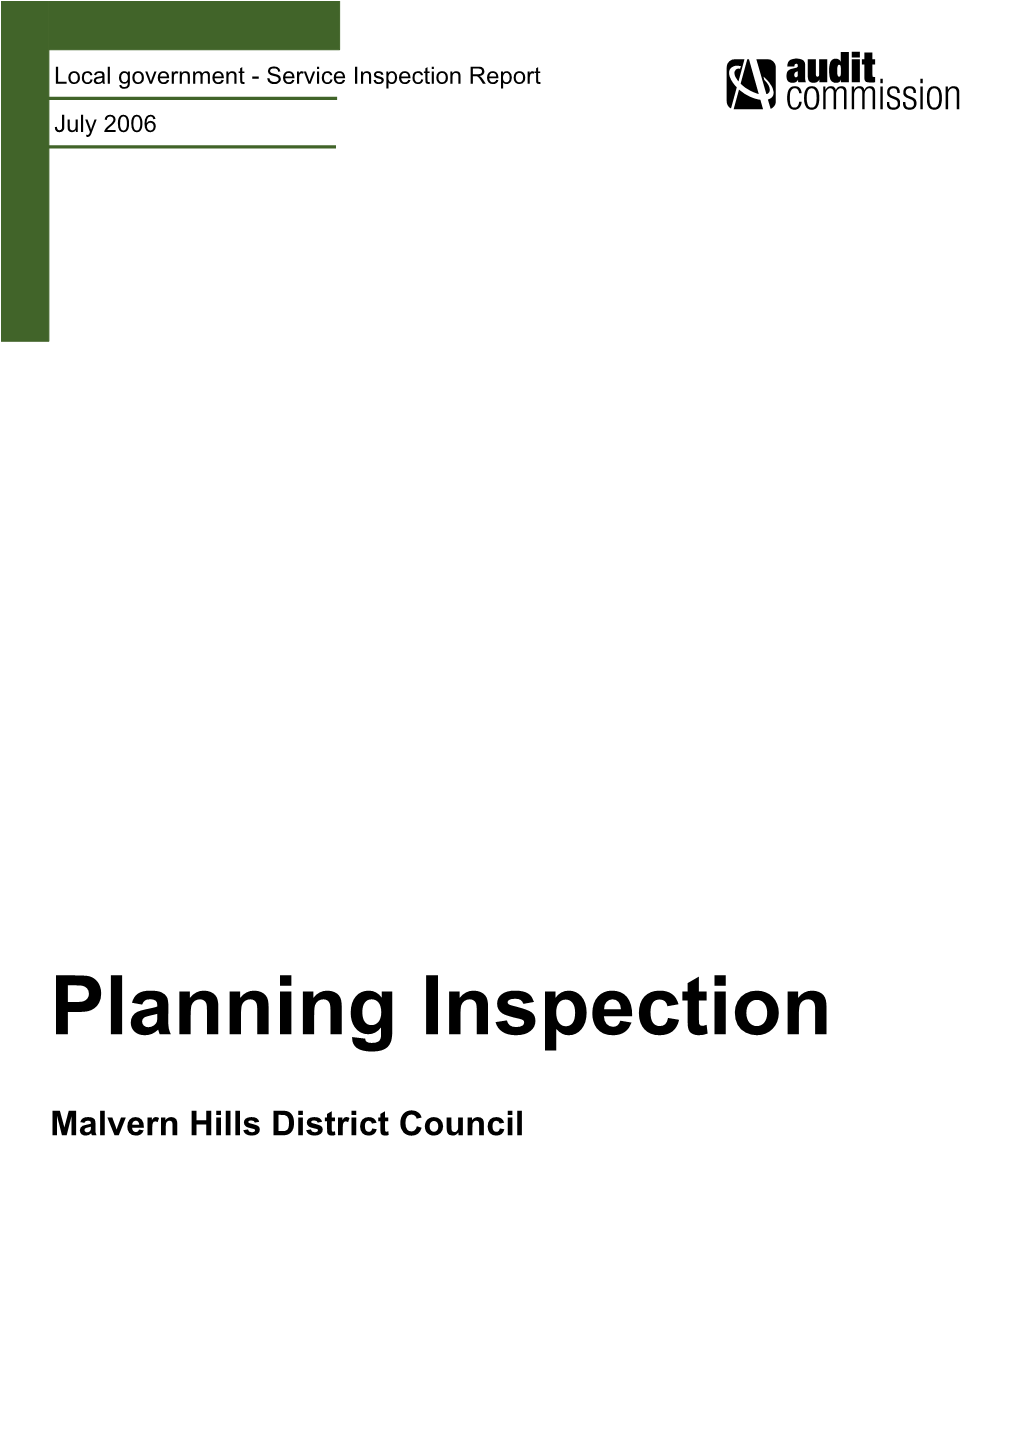 Planning Inspection